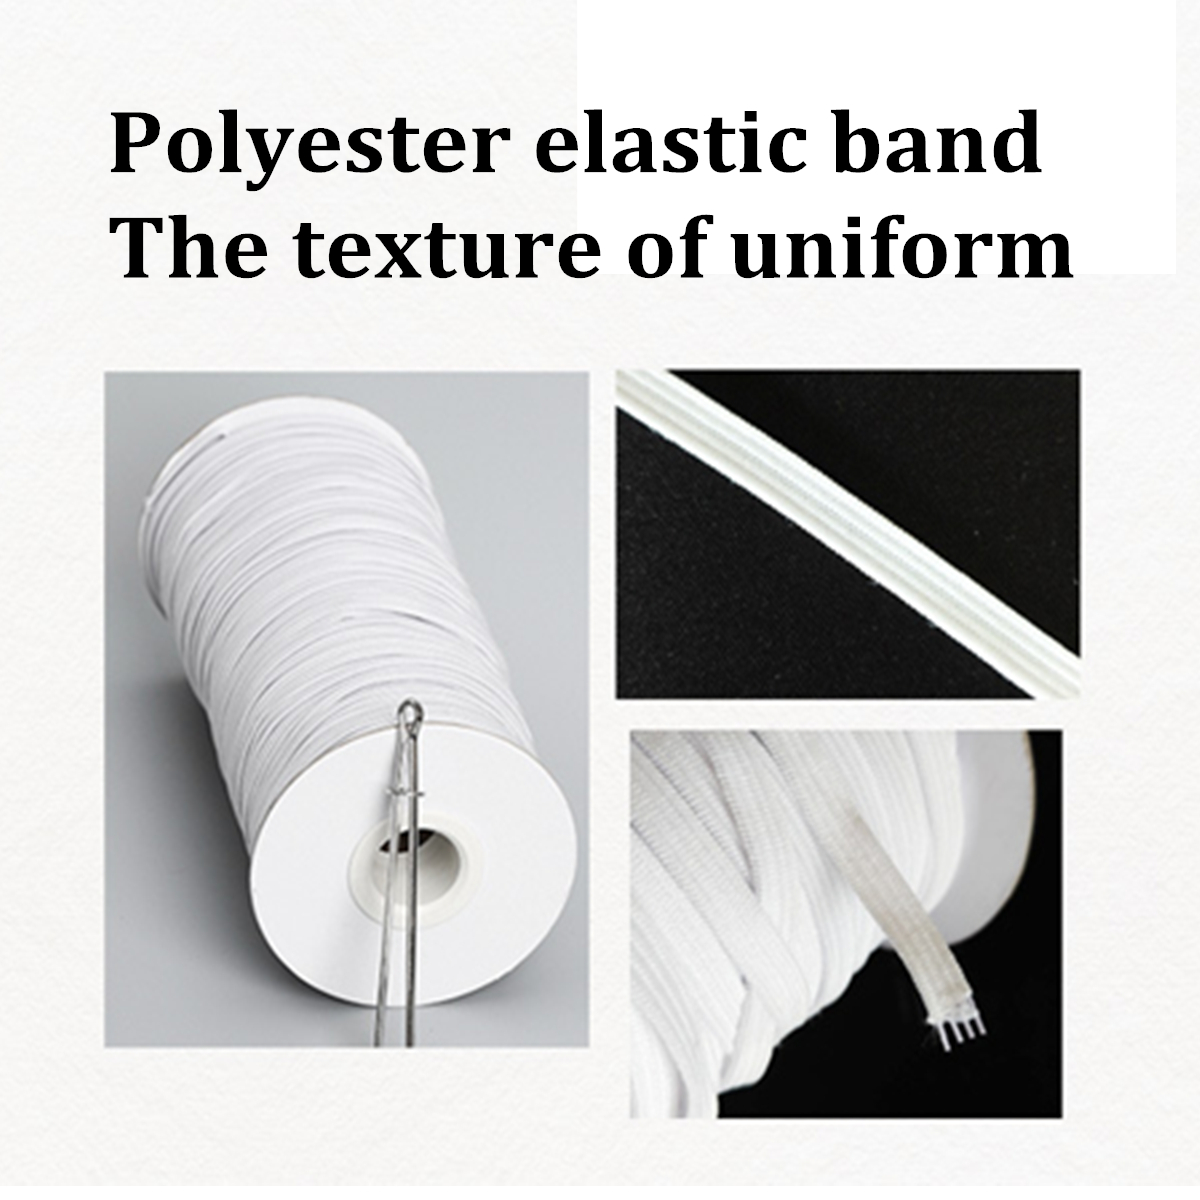 100160-Yards-DIY-Elastic-Band-Sewing-Crafting-Making-Braided-Cords-Knit-White-1671316-4